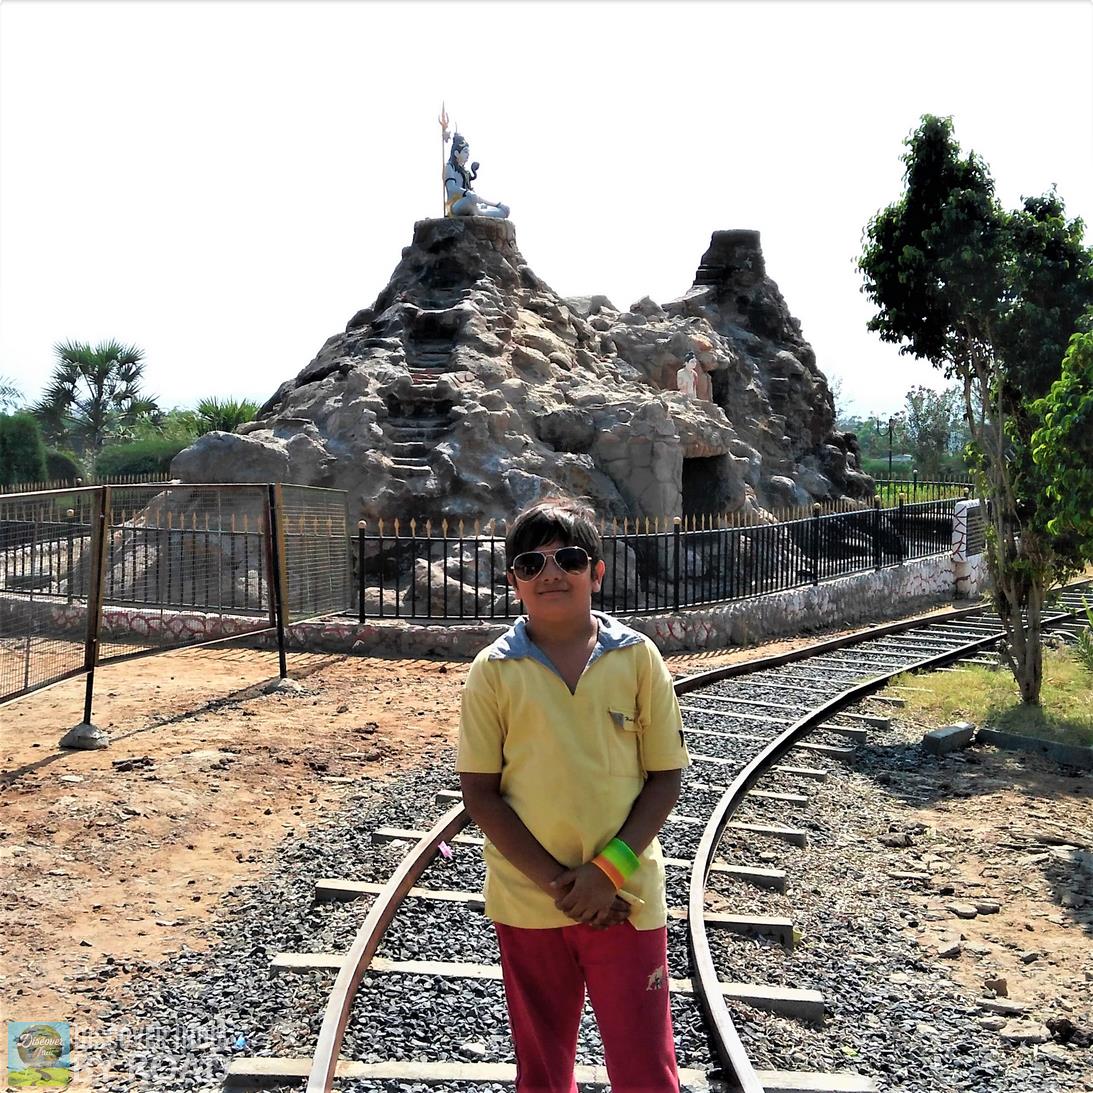 Toy Train track with Shiva statue in background at hill garden bhuj